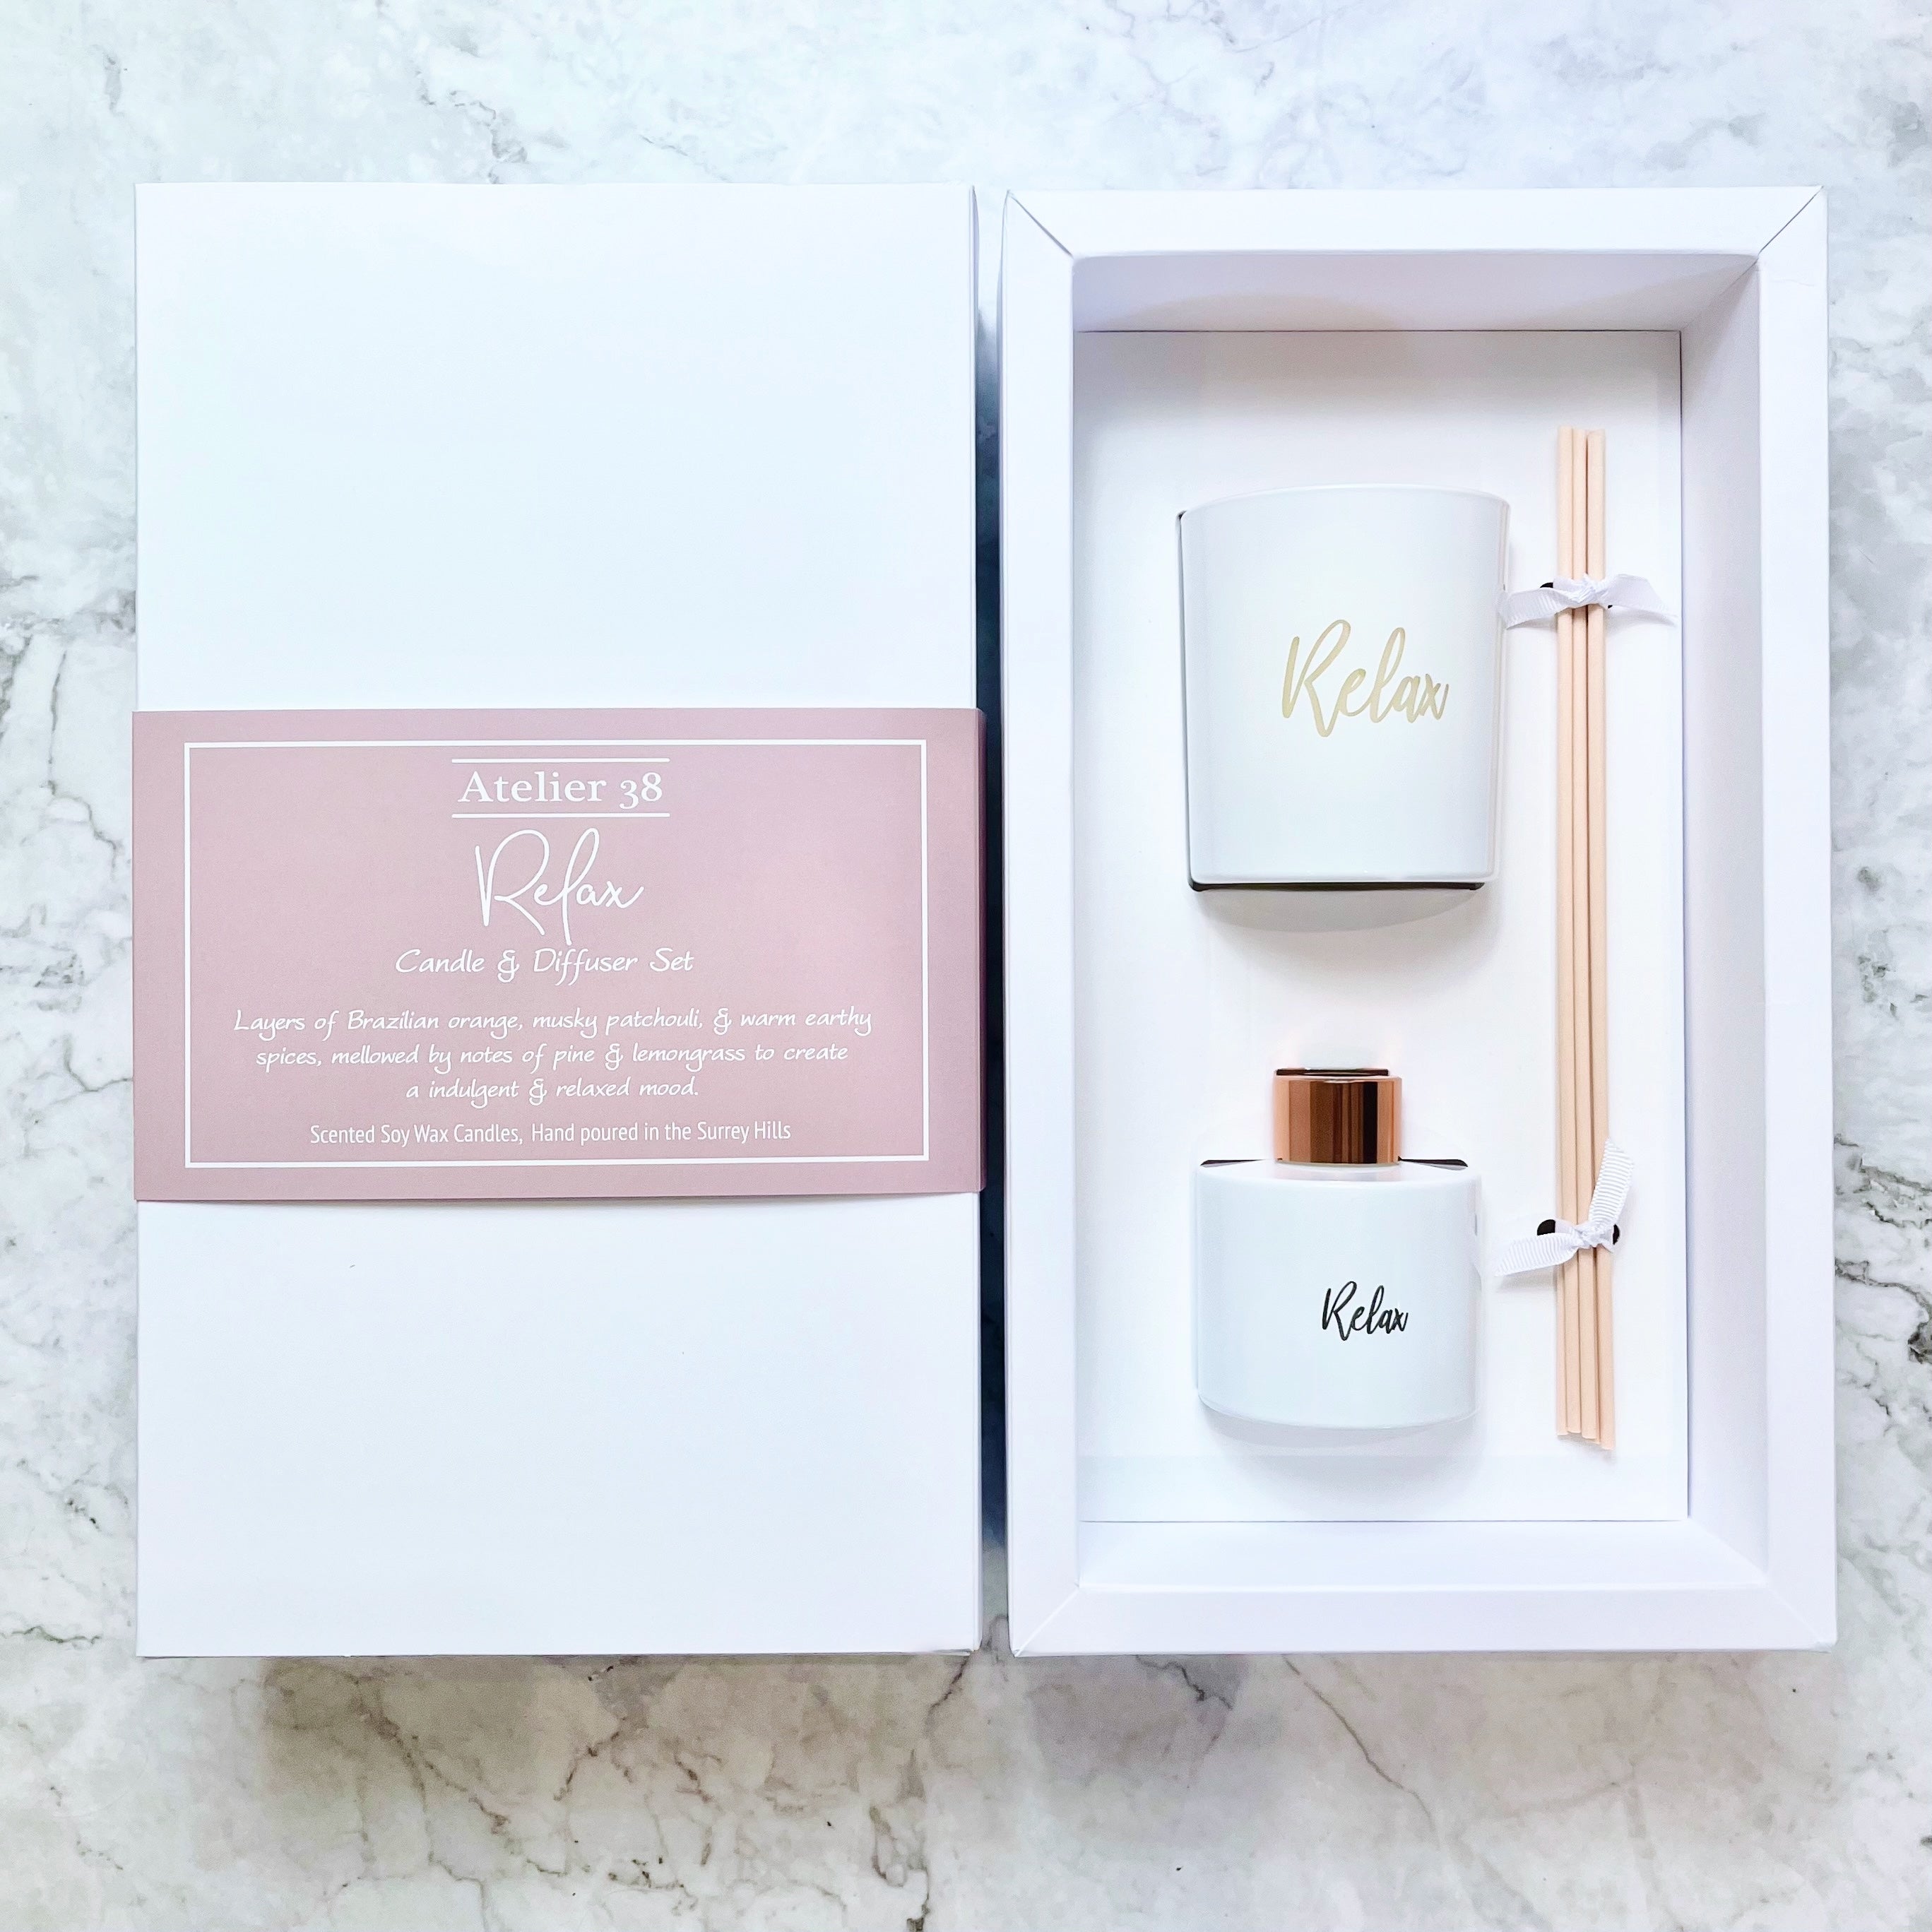 Atelier 38 Relax Spa Collection Candle and Diffuser Gift Set